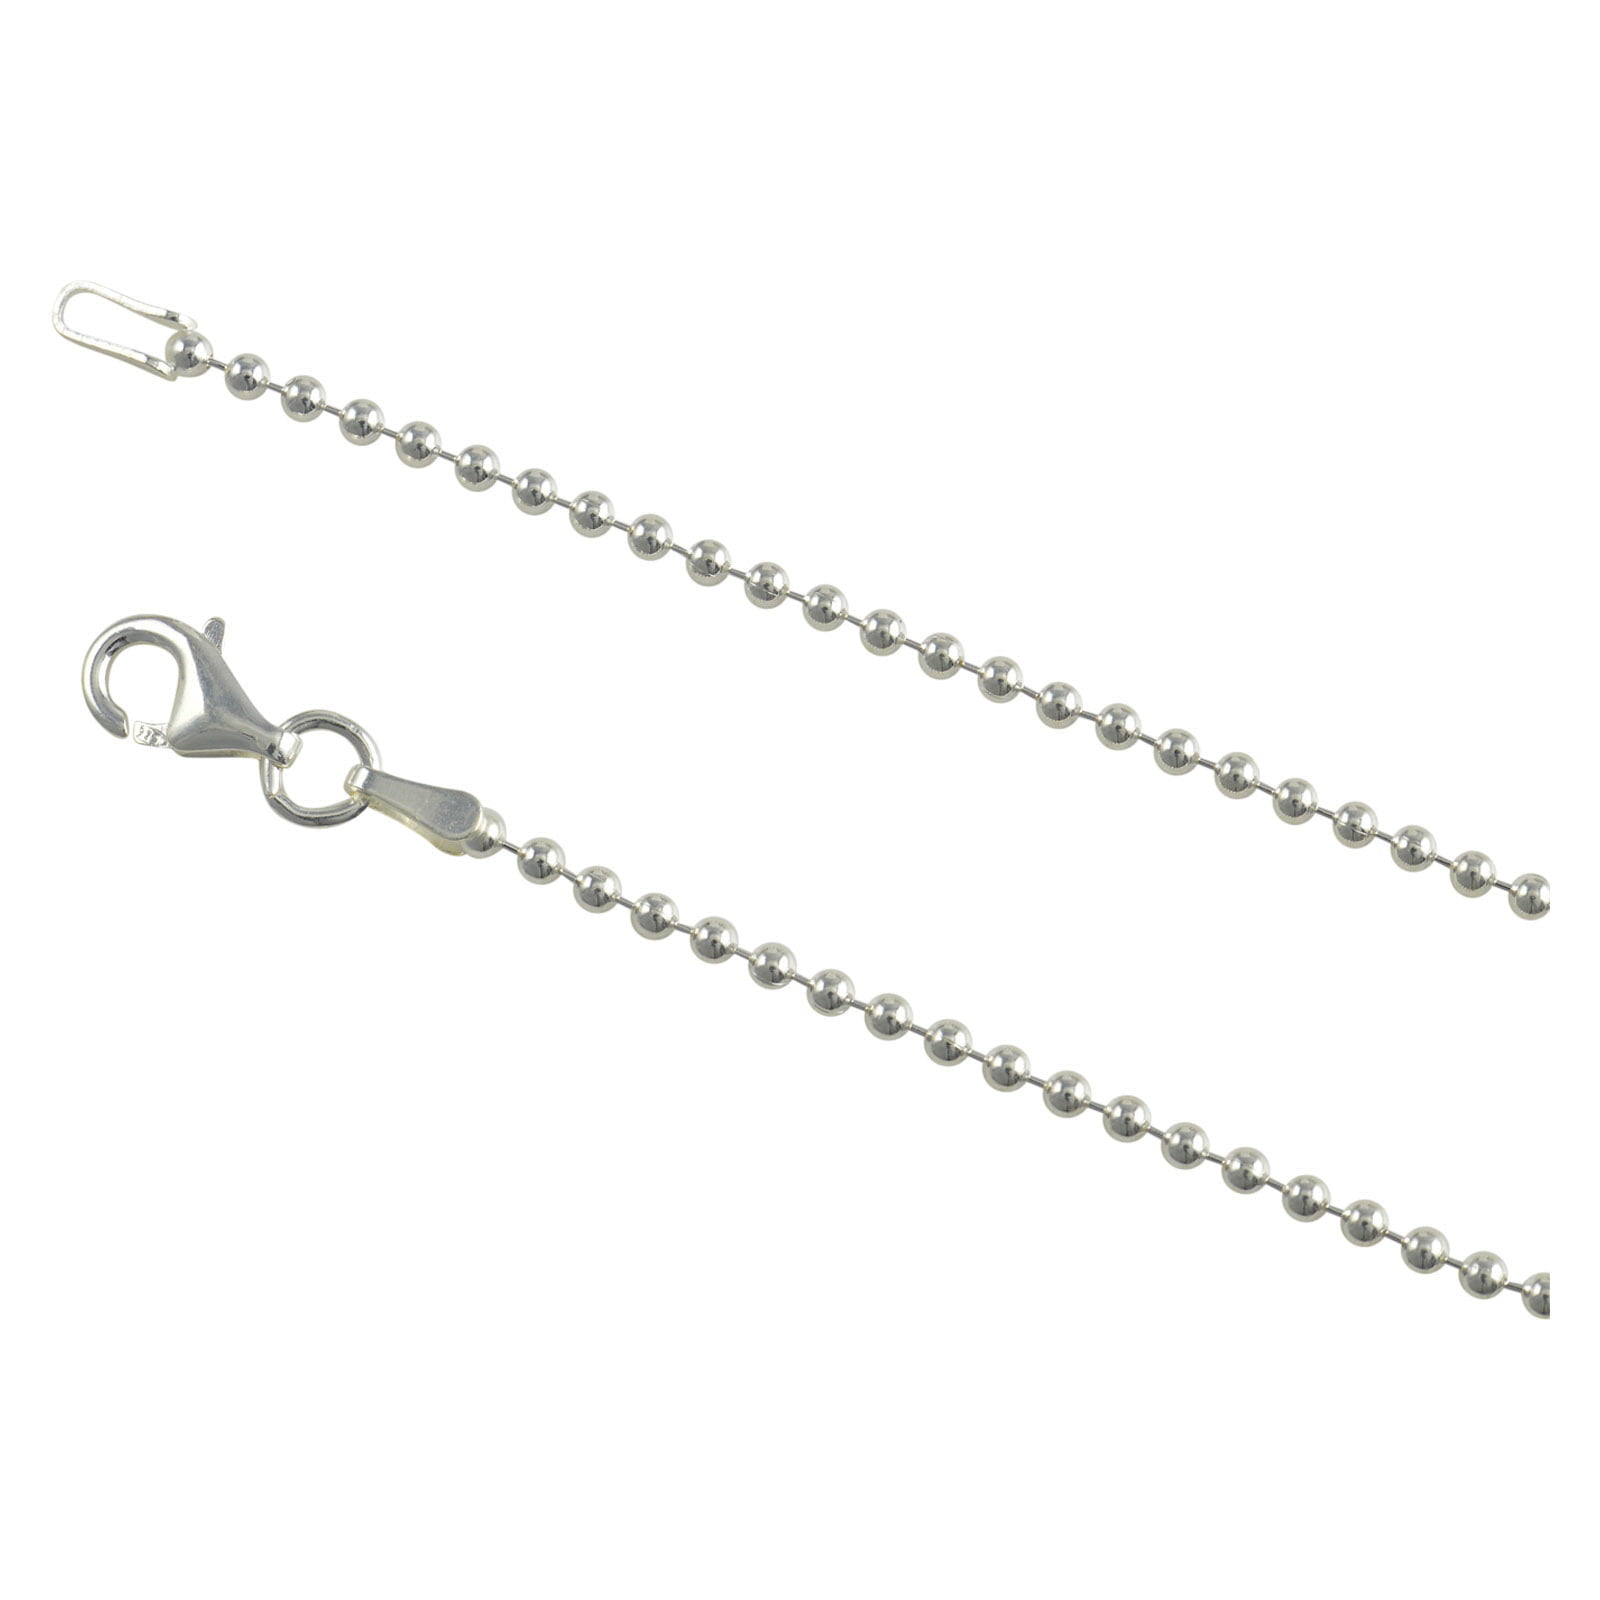 FREE SHIPPING 2 Silver Plated 24/" Long Ball Chain Necklace with Connector